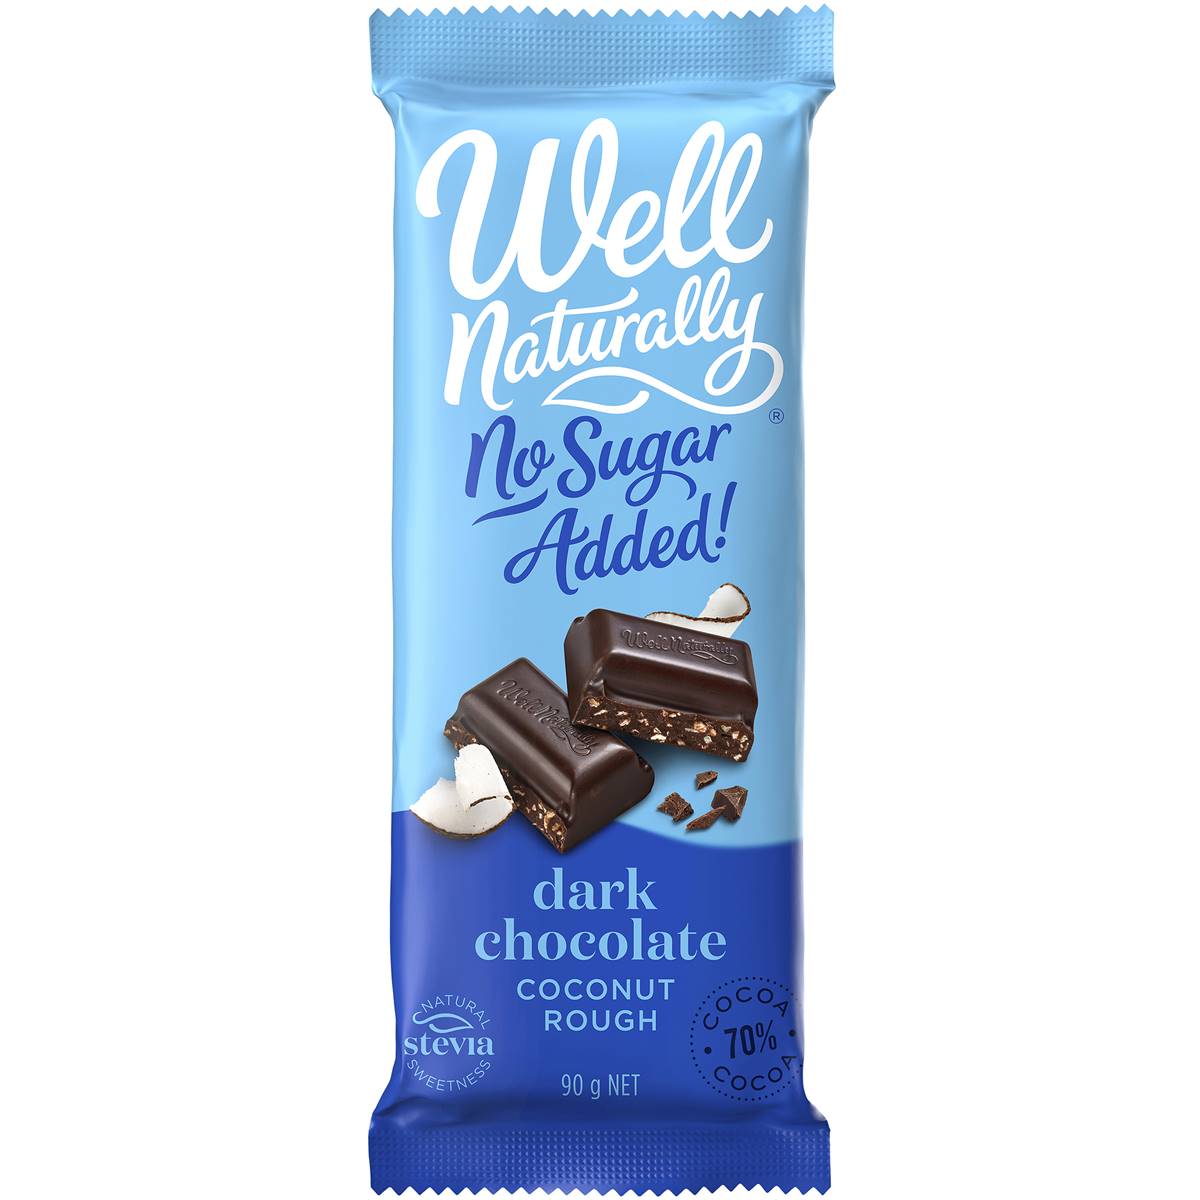 Calories in Well Naturally Dark Chocolate Coconut Rough No Sugar Added